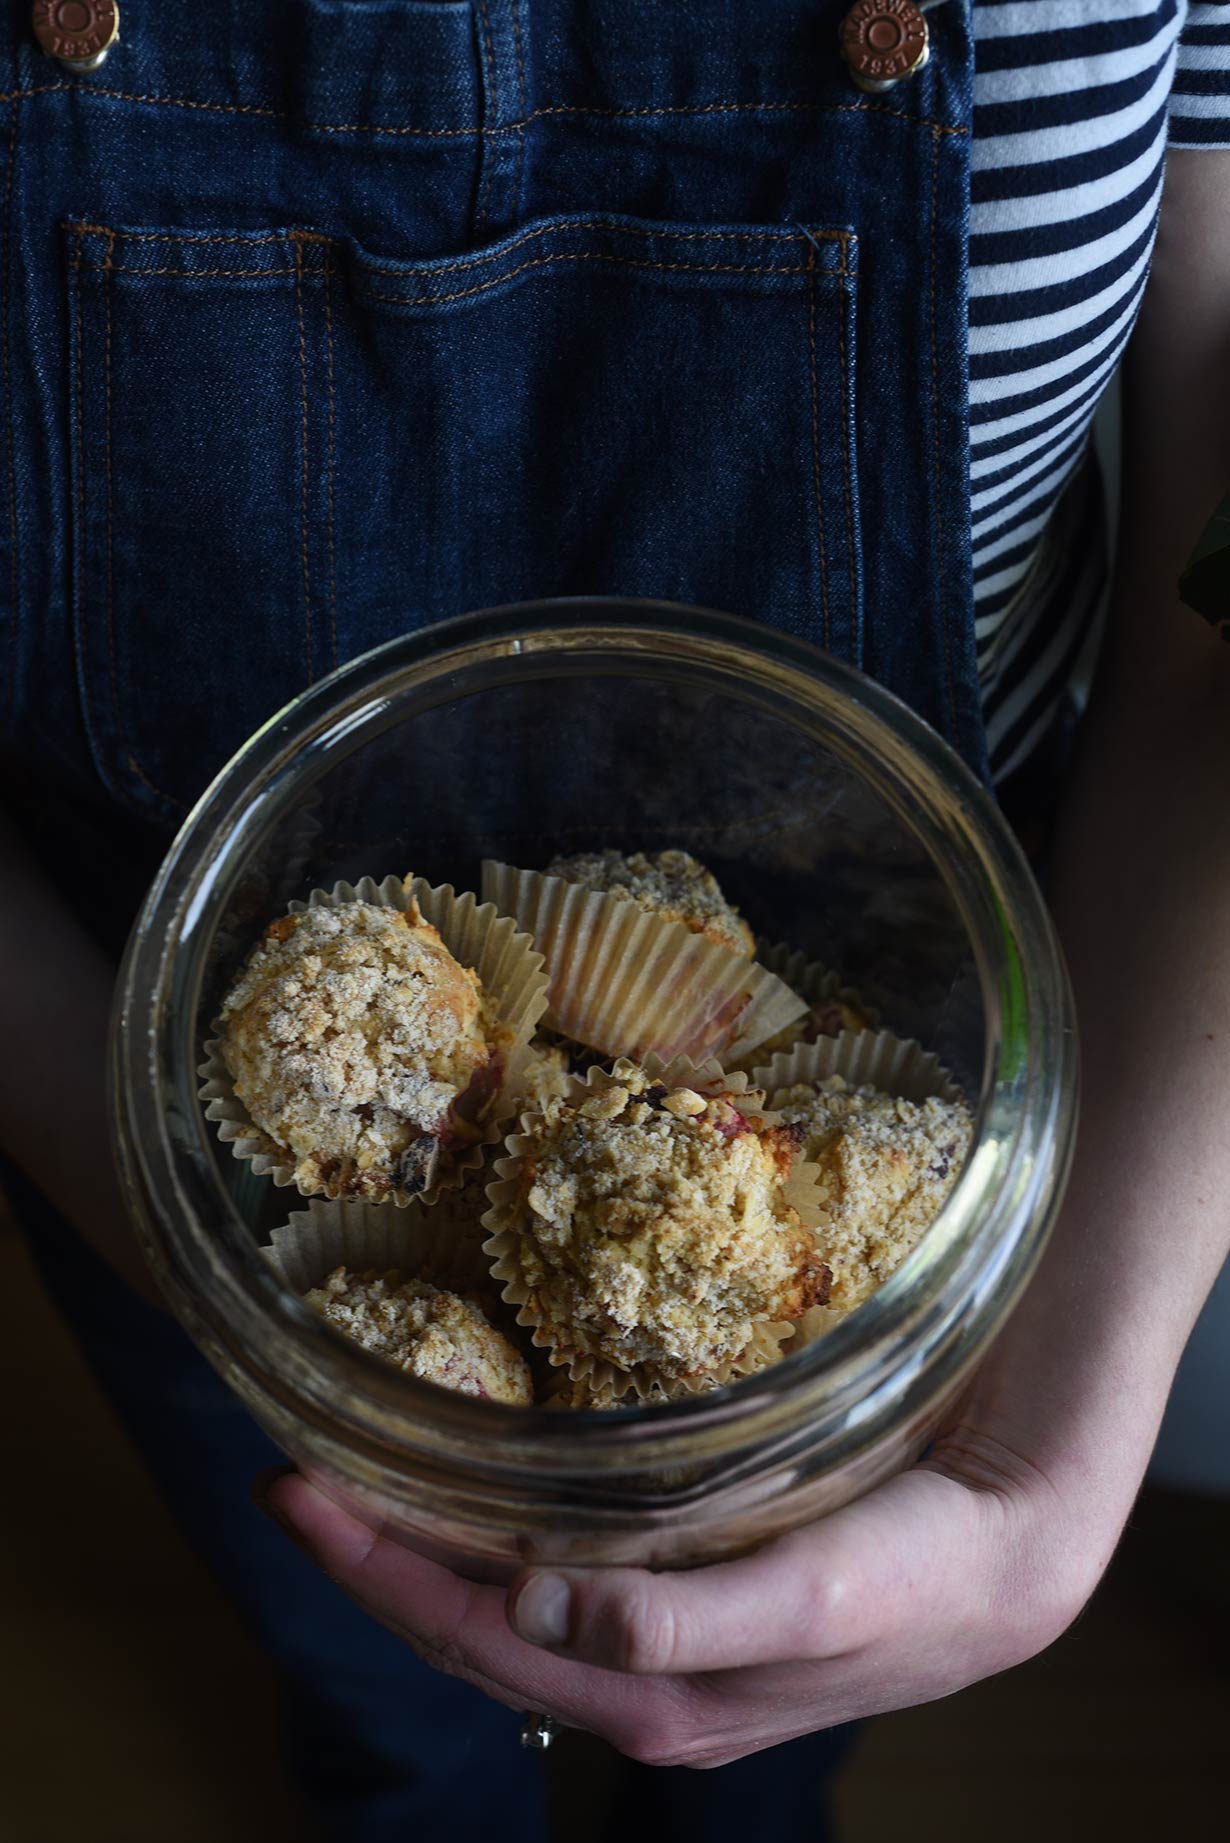 These Rhubarb Muffins with Candied Ginger are moist and super easy to make: all you need is a few bowls and a muffin pan! If you're looking for inspiring rhubarb recipes, look no further than this breakfast and snack time favorite.